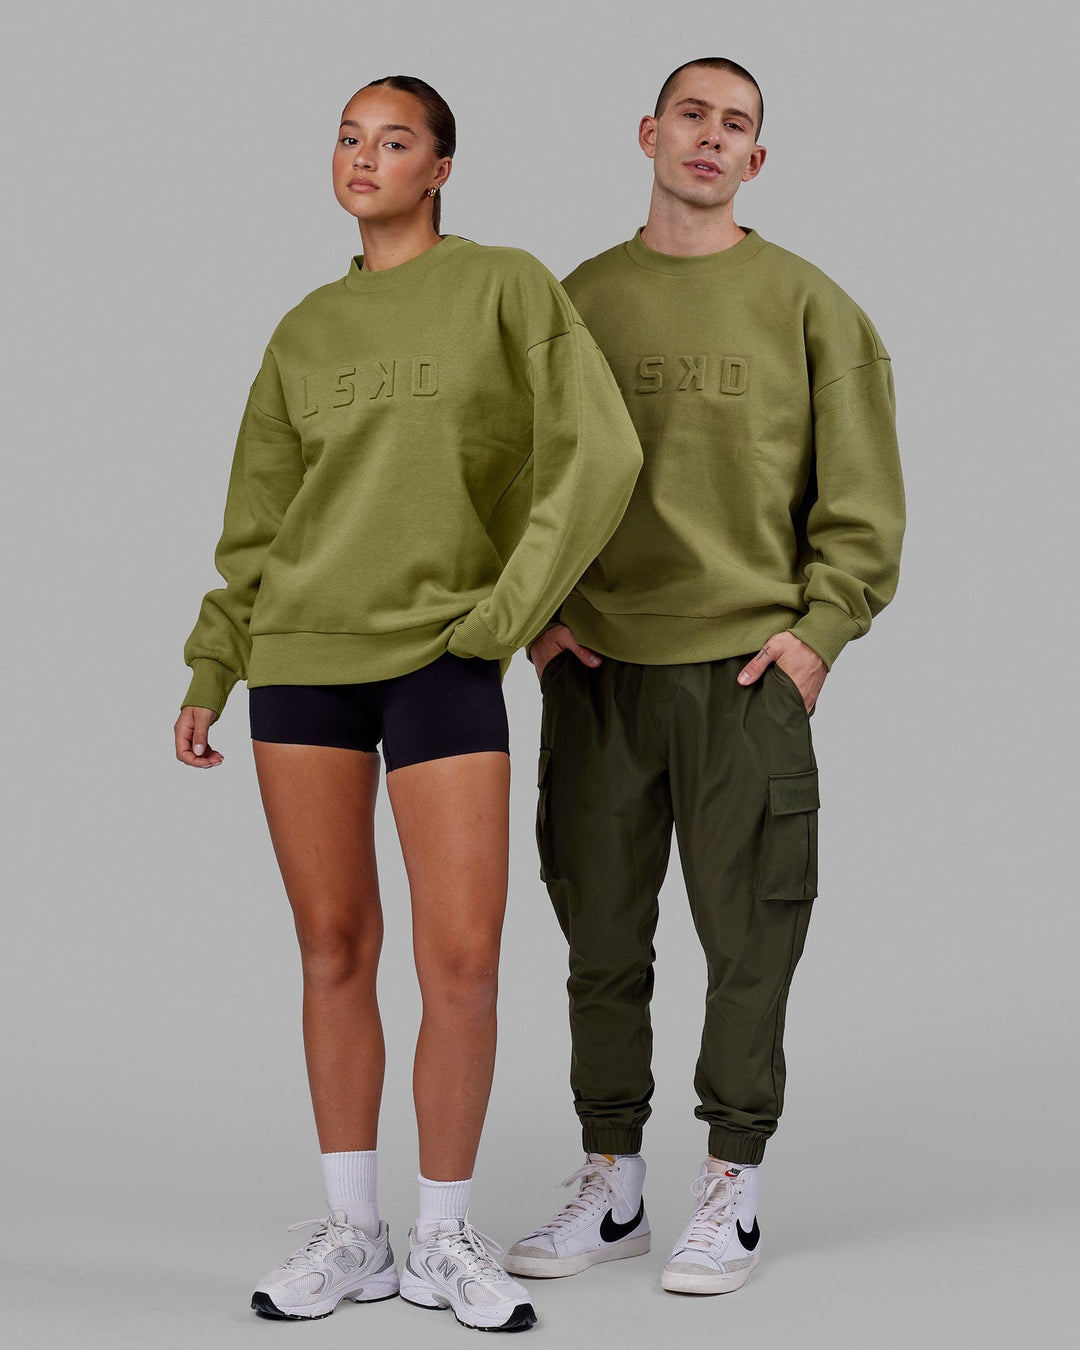 Duo wearing Unisex Stamped Sweater Oversize - Moss Stone